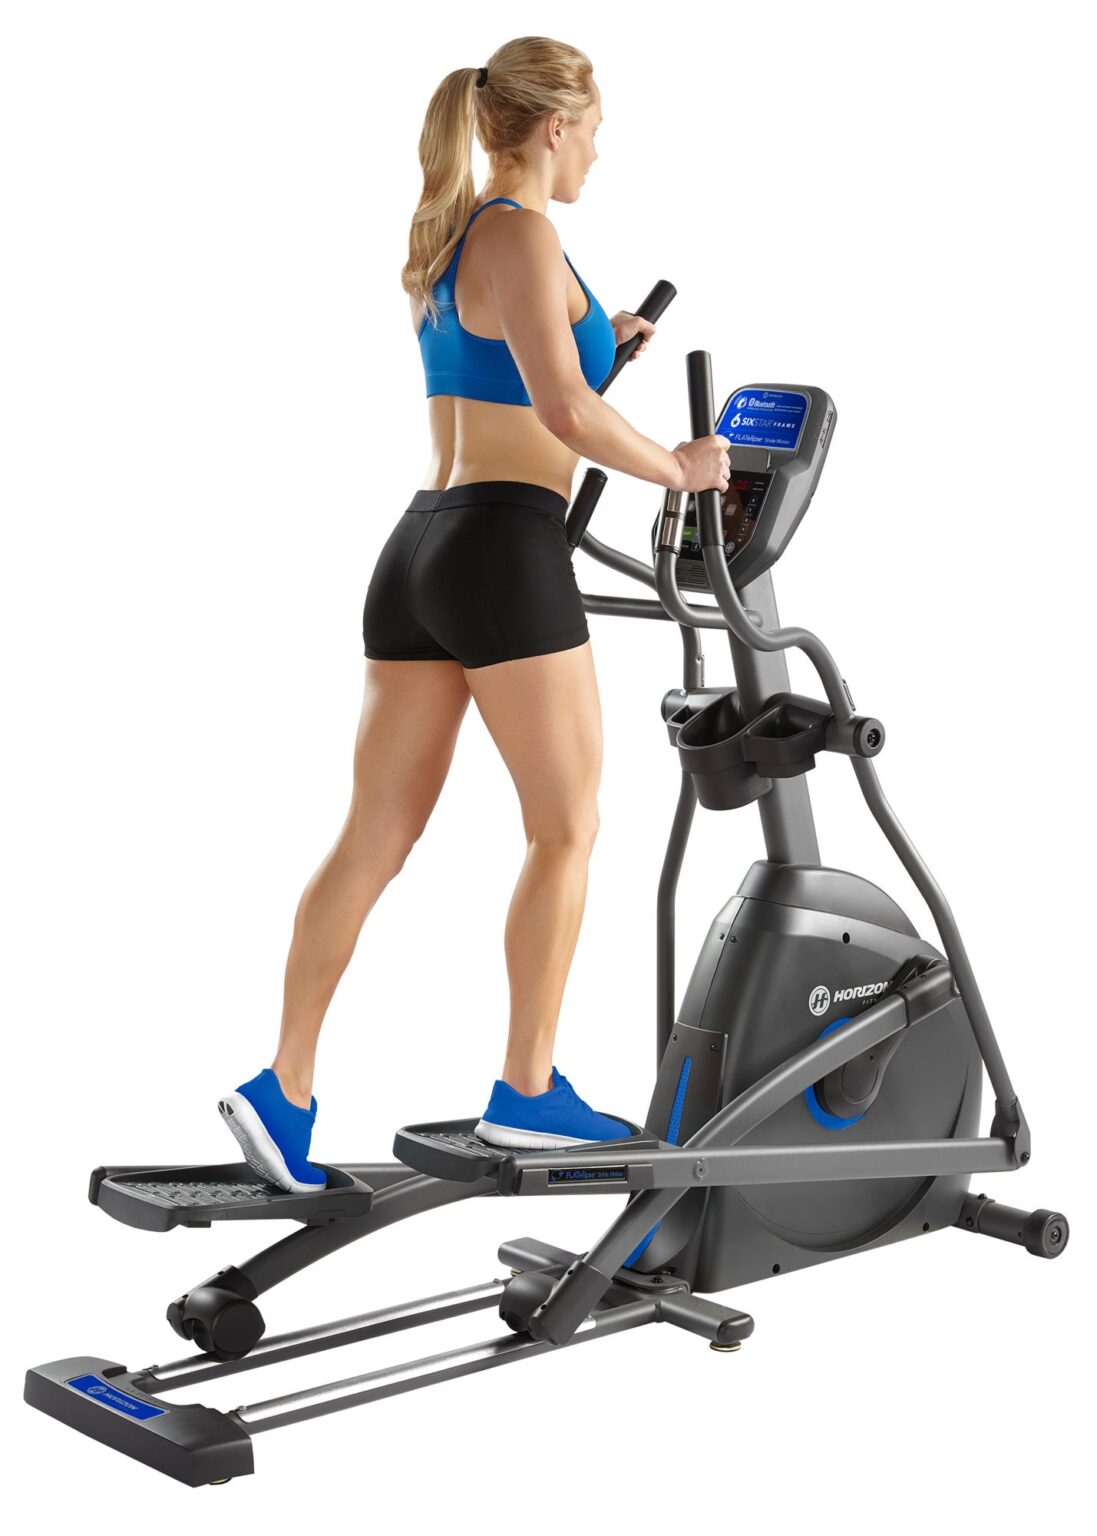 Top 10 Best Ellipticals for Home Use (2021 Reviews) Gym Life Essentials